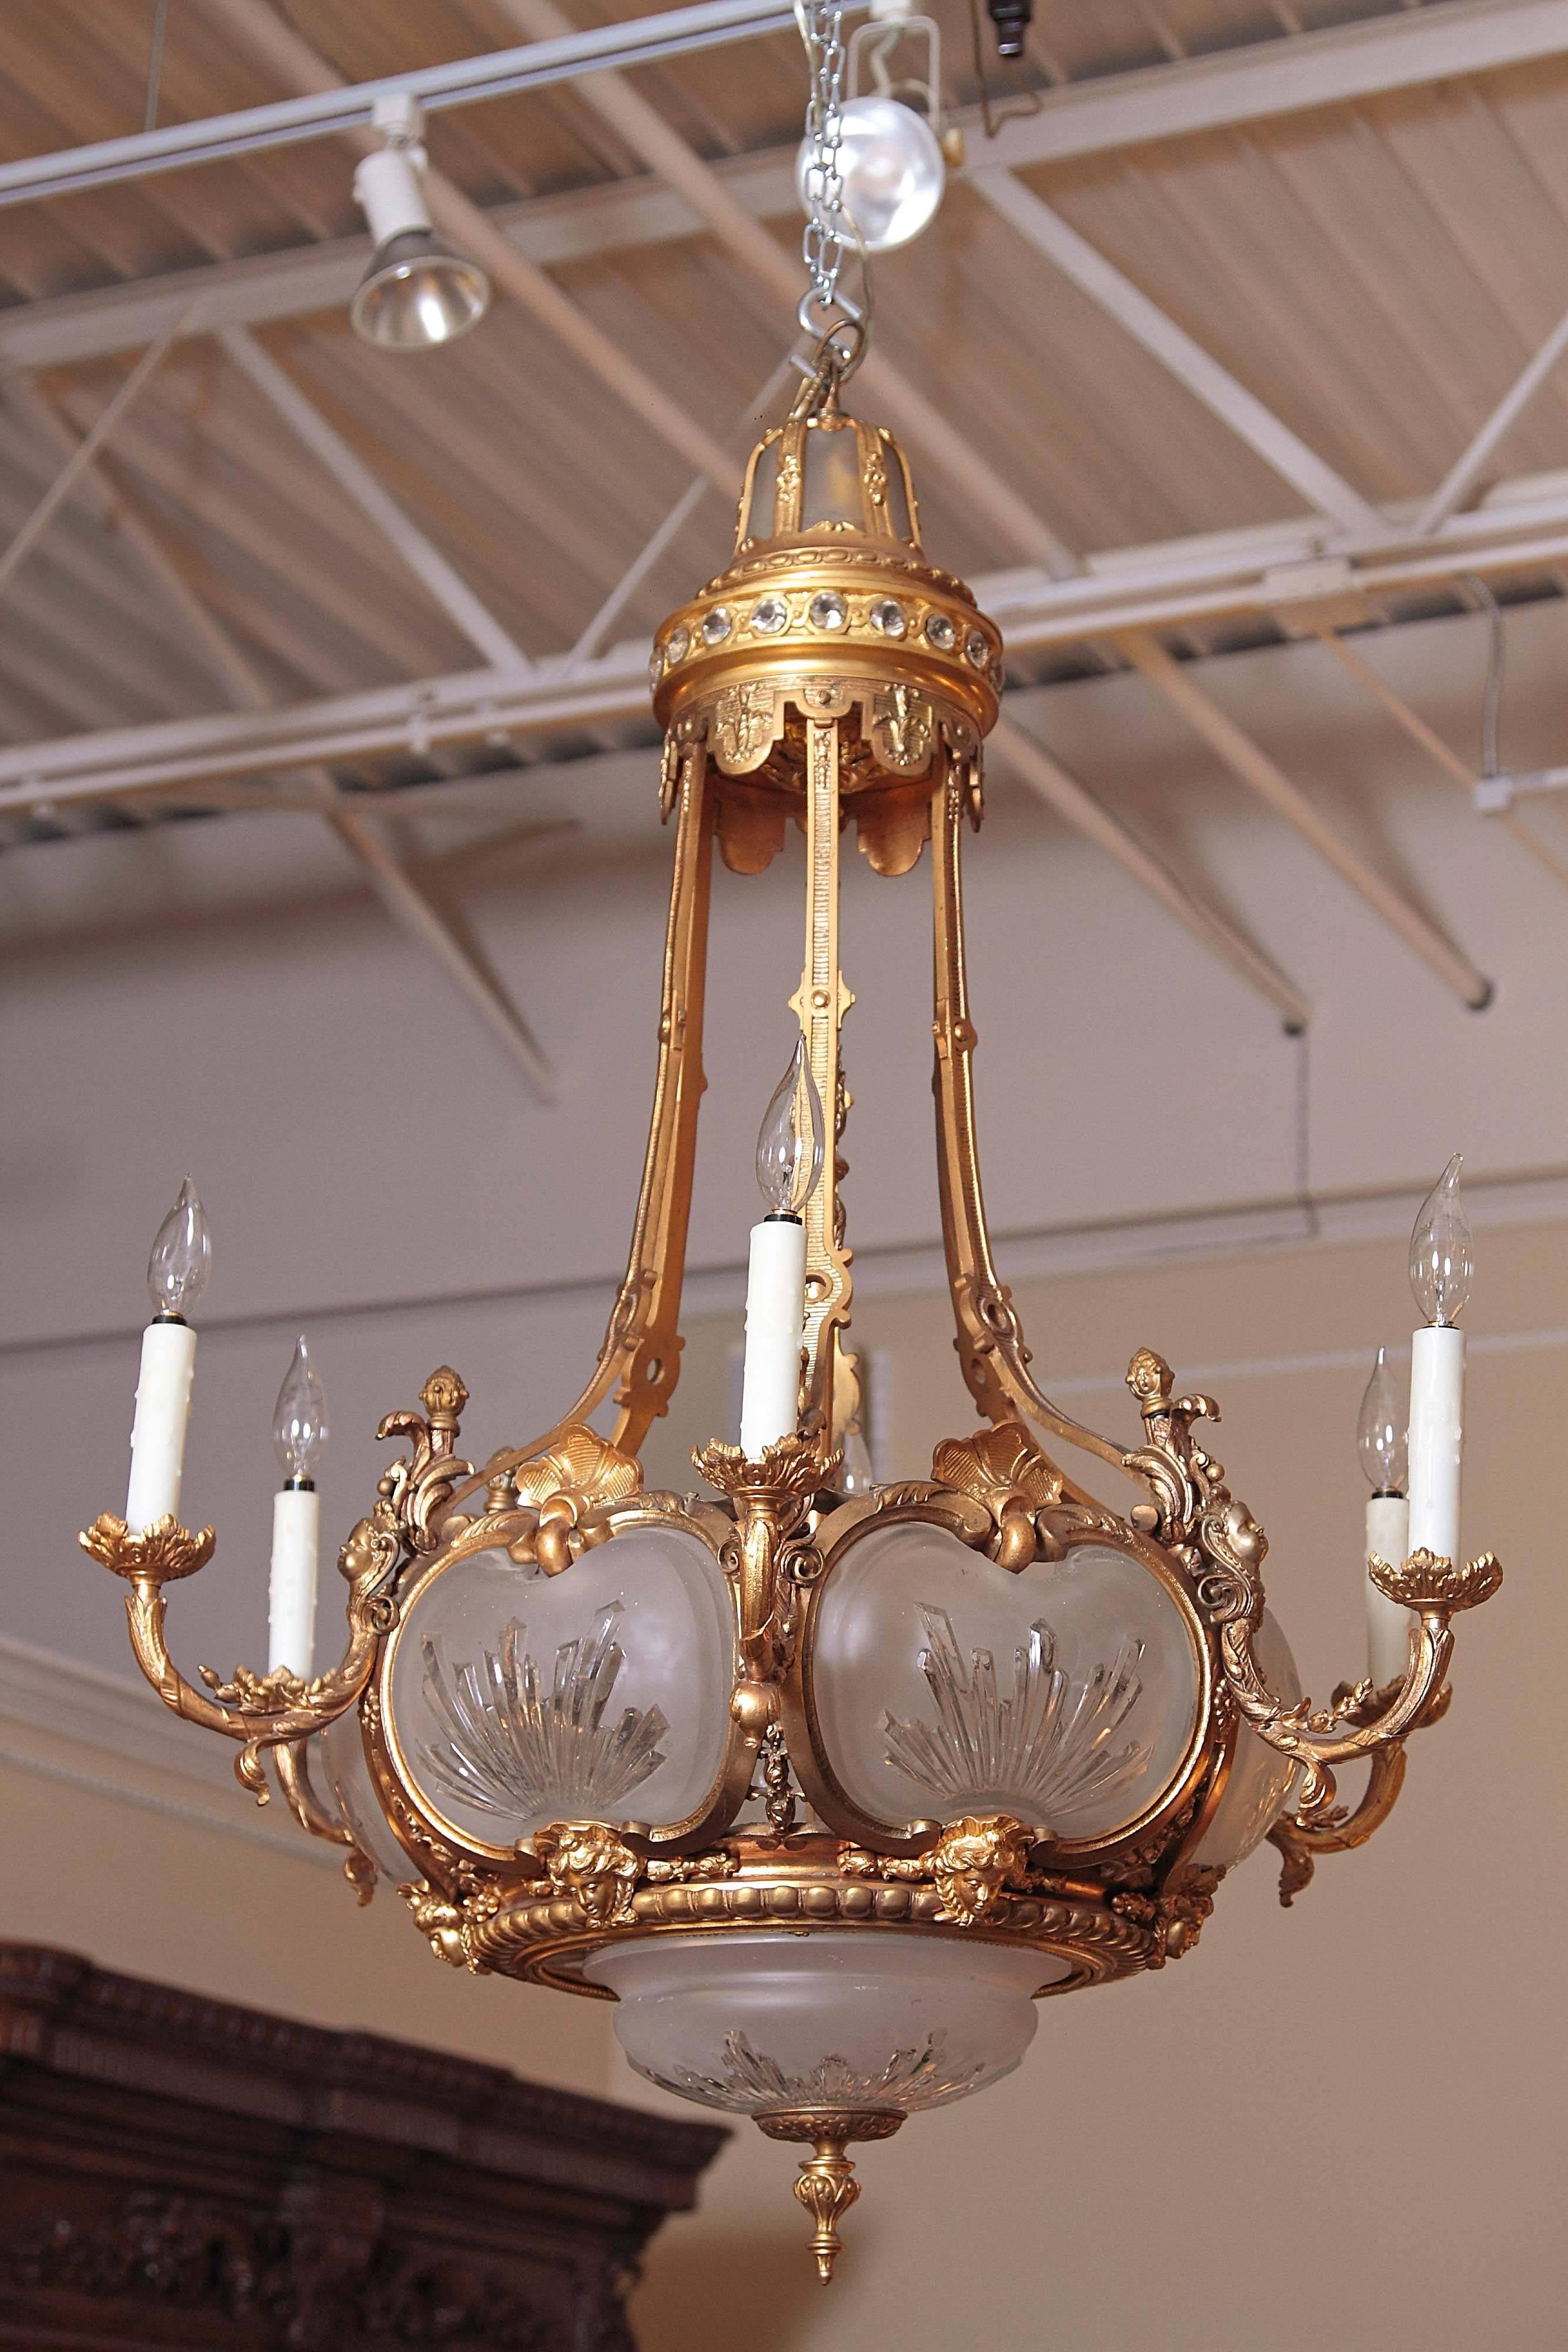 19th century French Louis Philippe gilt bronze finely cast chandelier. Frosted crystal bowl and sides. Hand etched. Gilt bronze cherub heads and female heads.